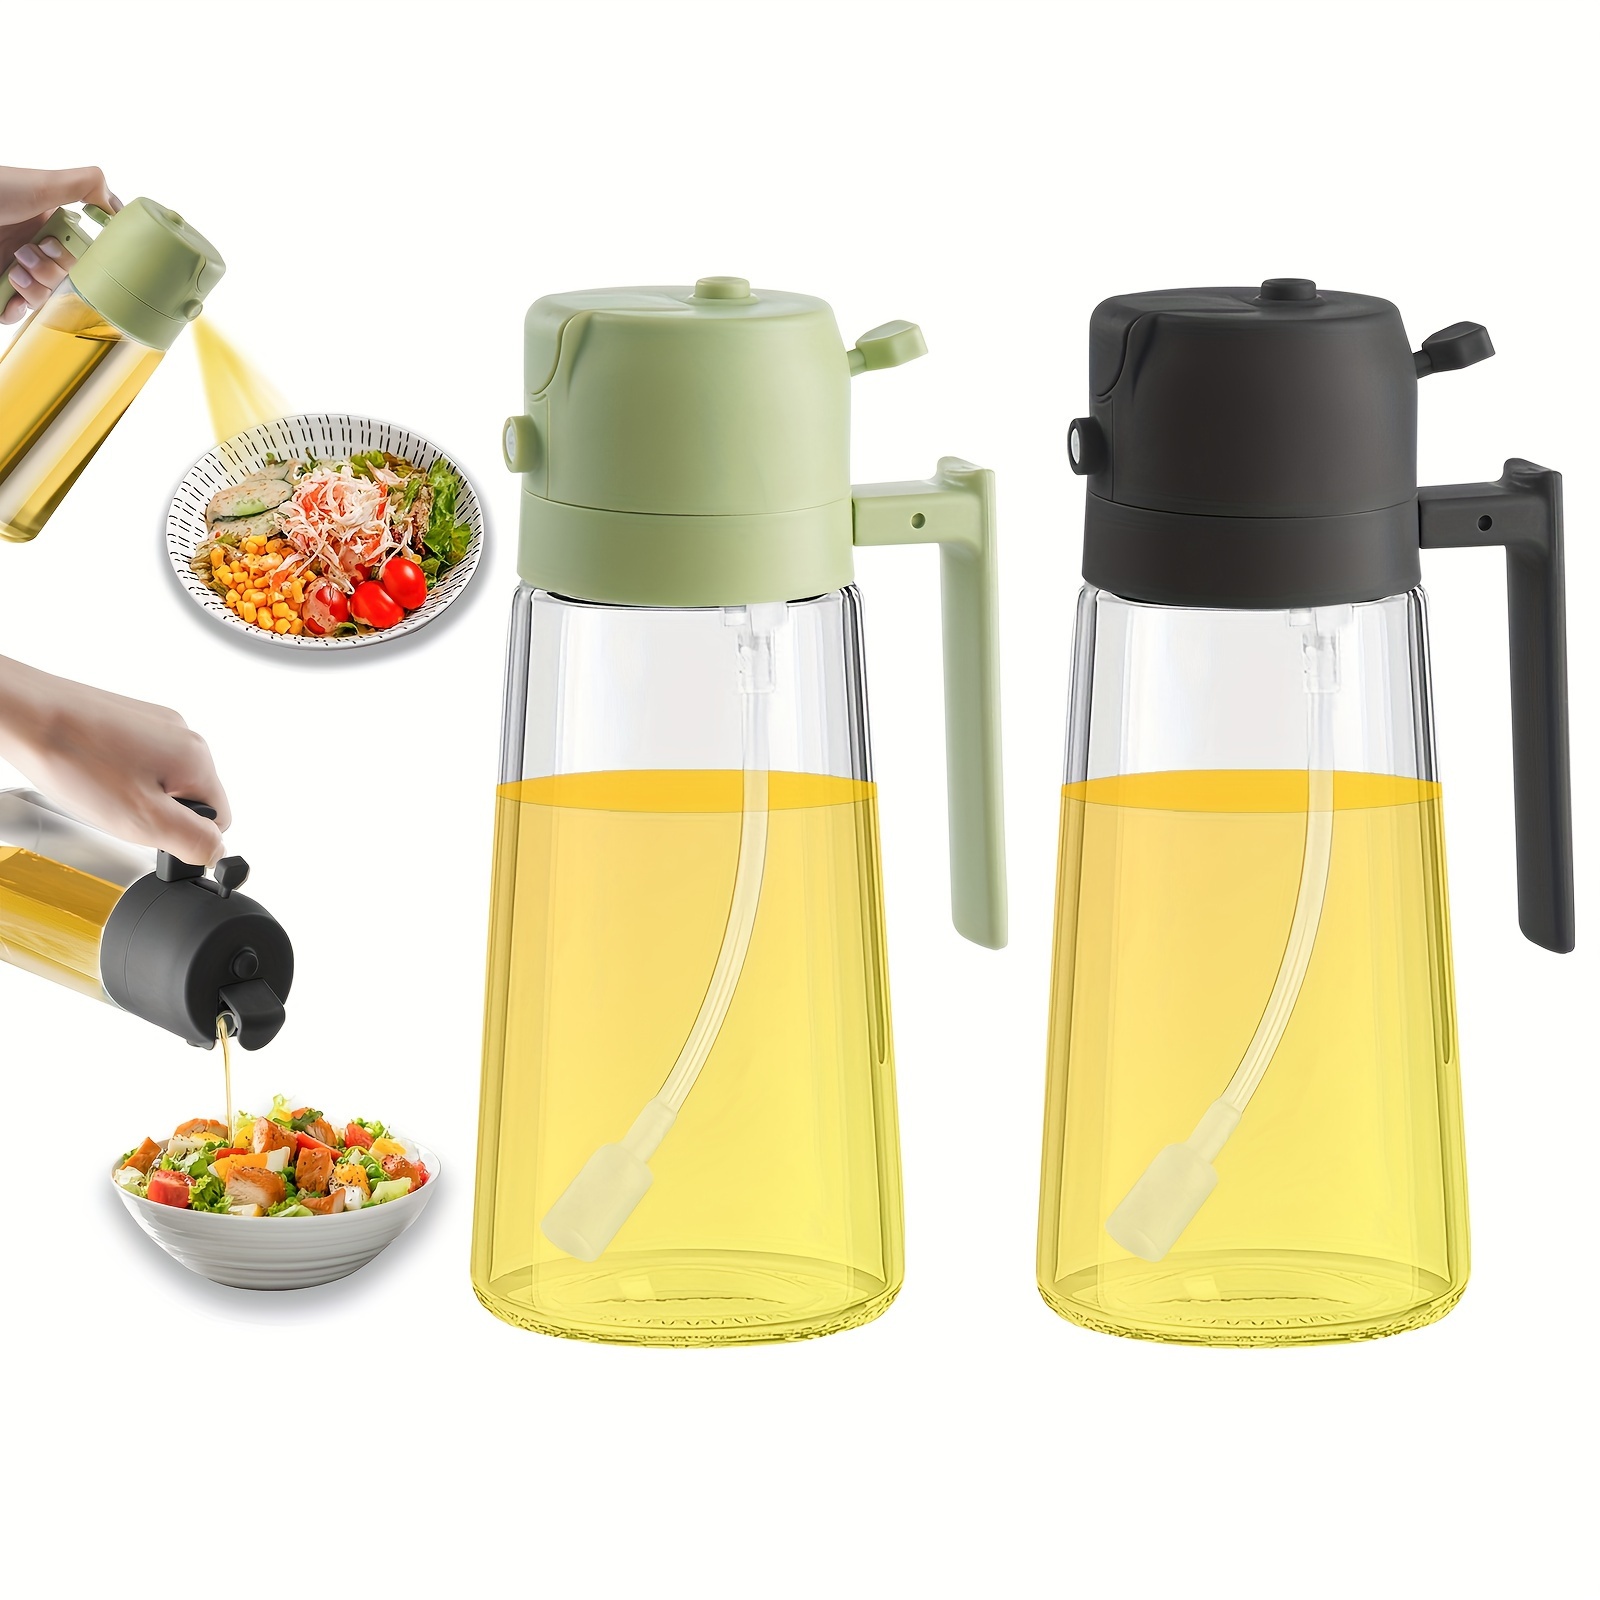 

2pcs Green+black 2 In 1 Oil Dispenser And Oil Sprayer Premium Olive Oil Dispenser Bottle With Automatic Cap, Non-drip Spout Oil Mister Oil Spray Bottle For Cooking, Kitchen, Salad, Barbecue